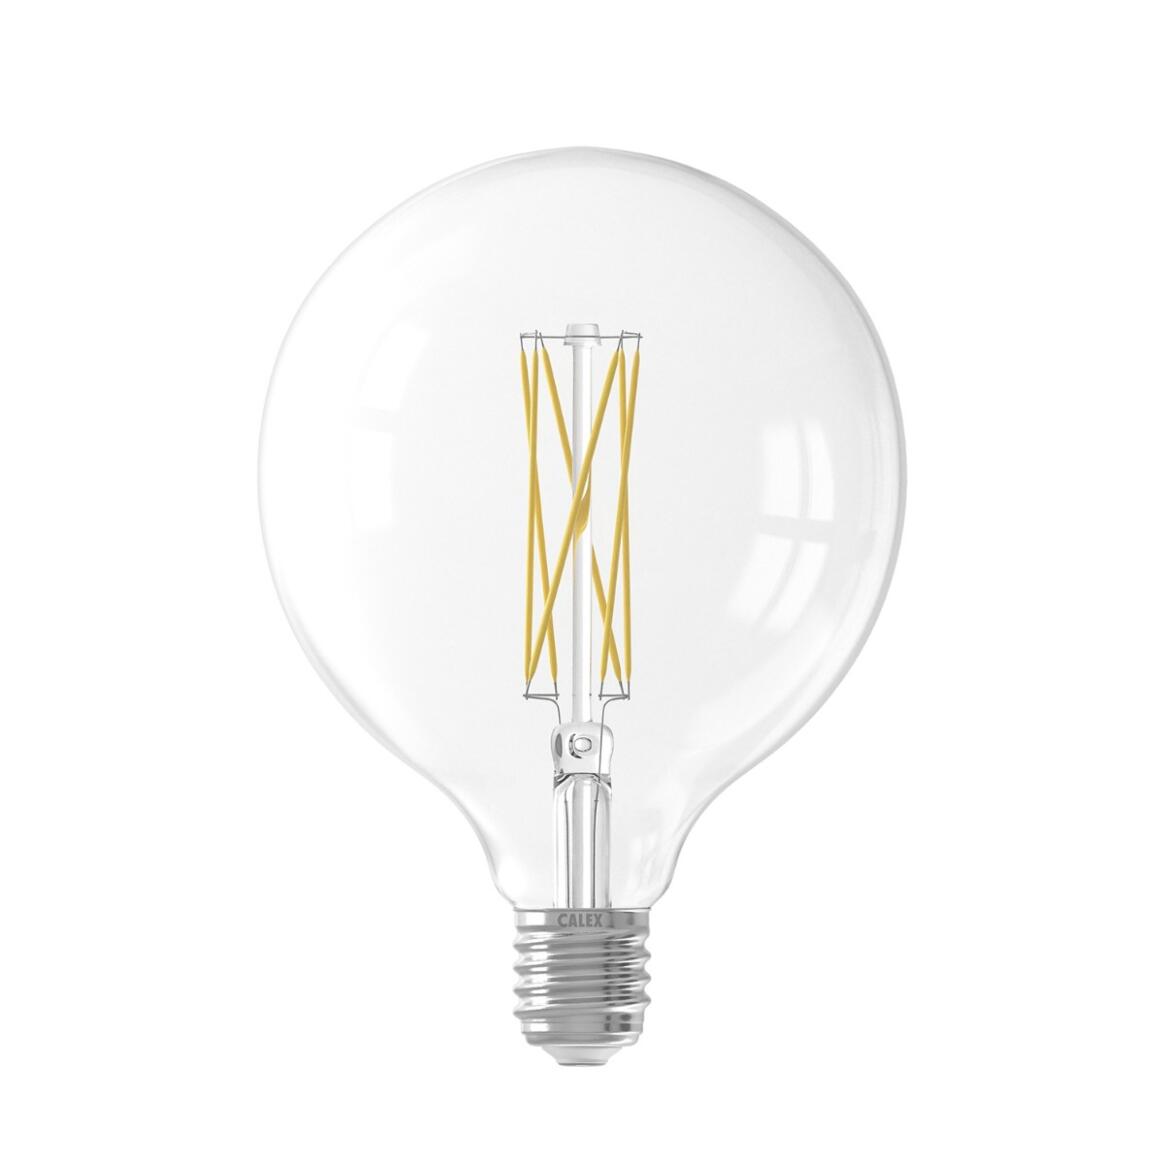 LED Clear Globe Filament Bulb Dimmable G125 E27 4W 2300K 350lm 12.5cm main product image